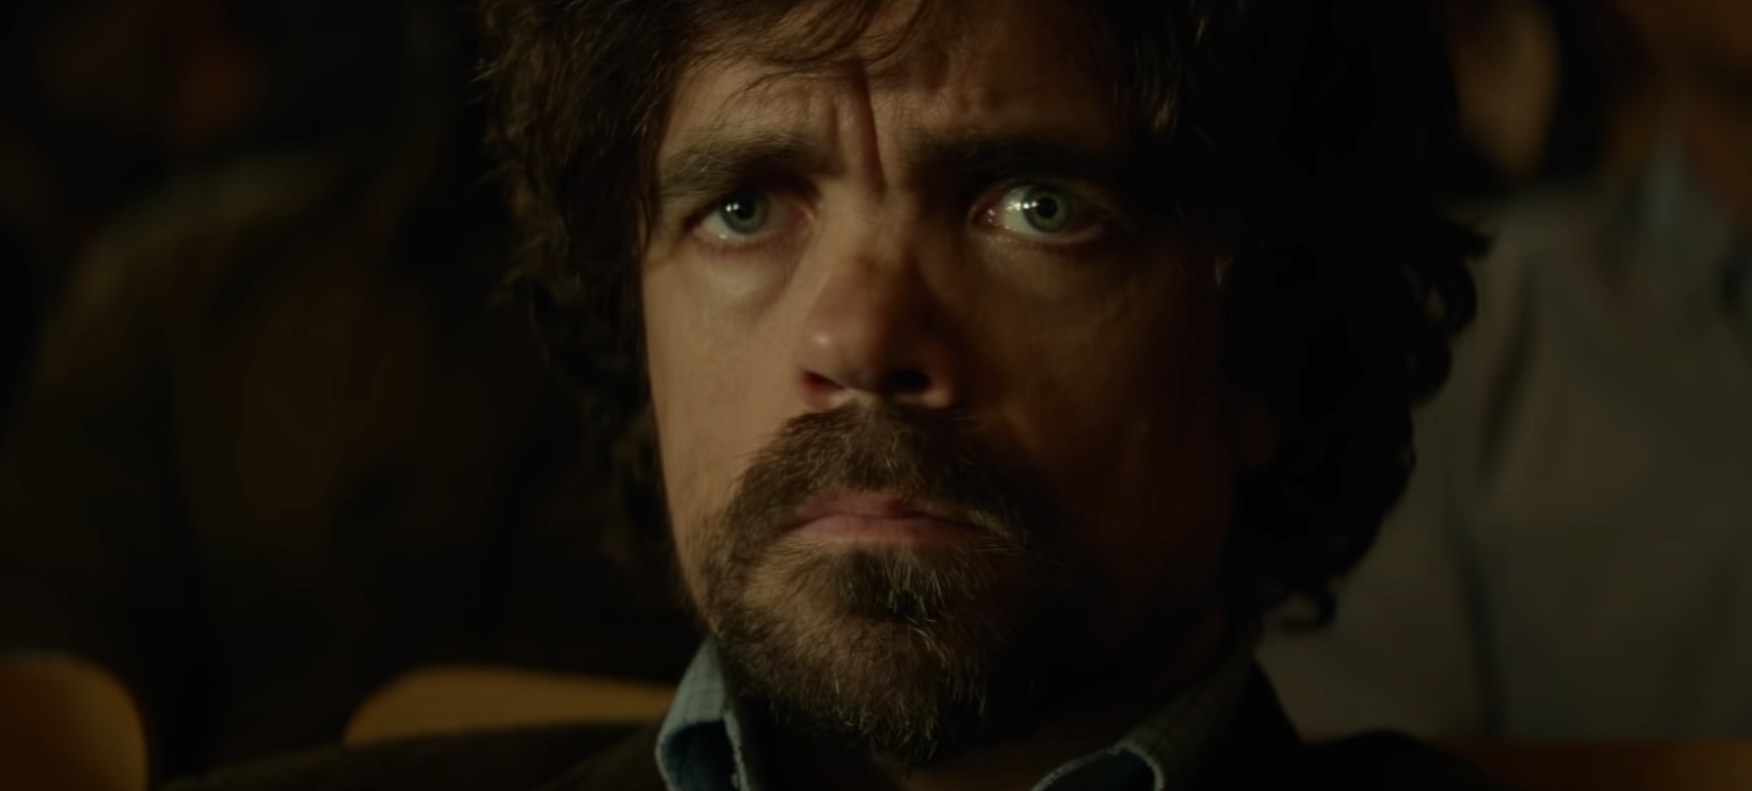 All Upcoming Peter Dinklage Movies and TV Shows